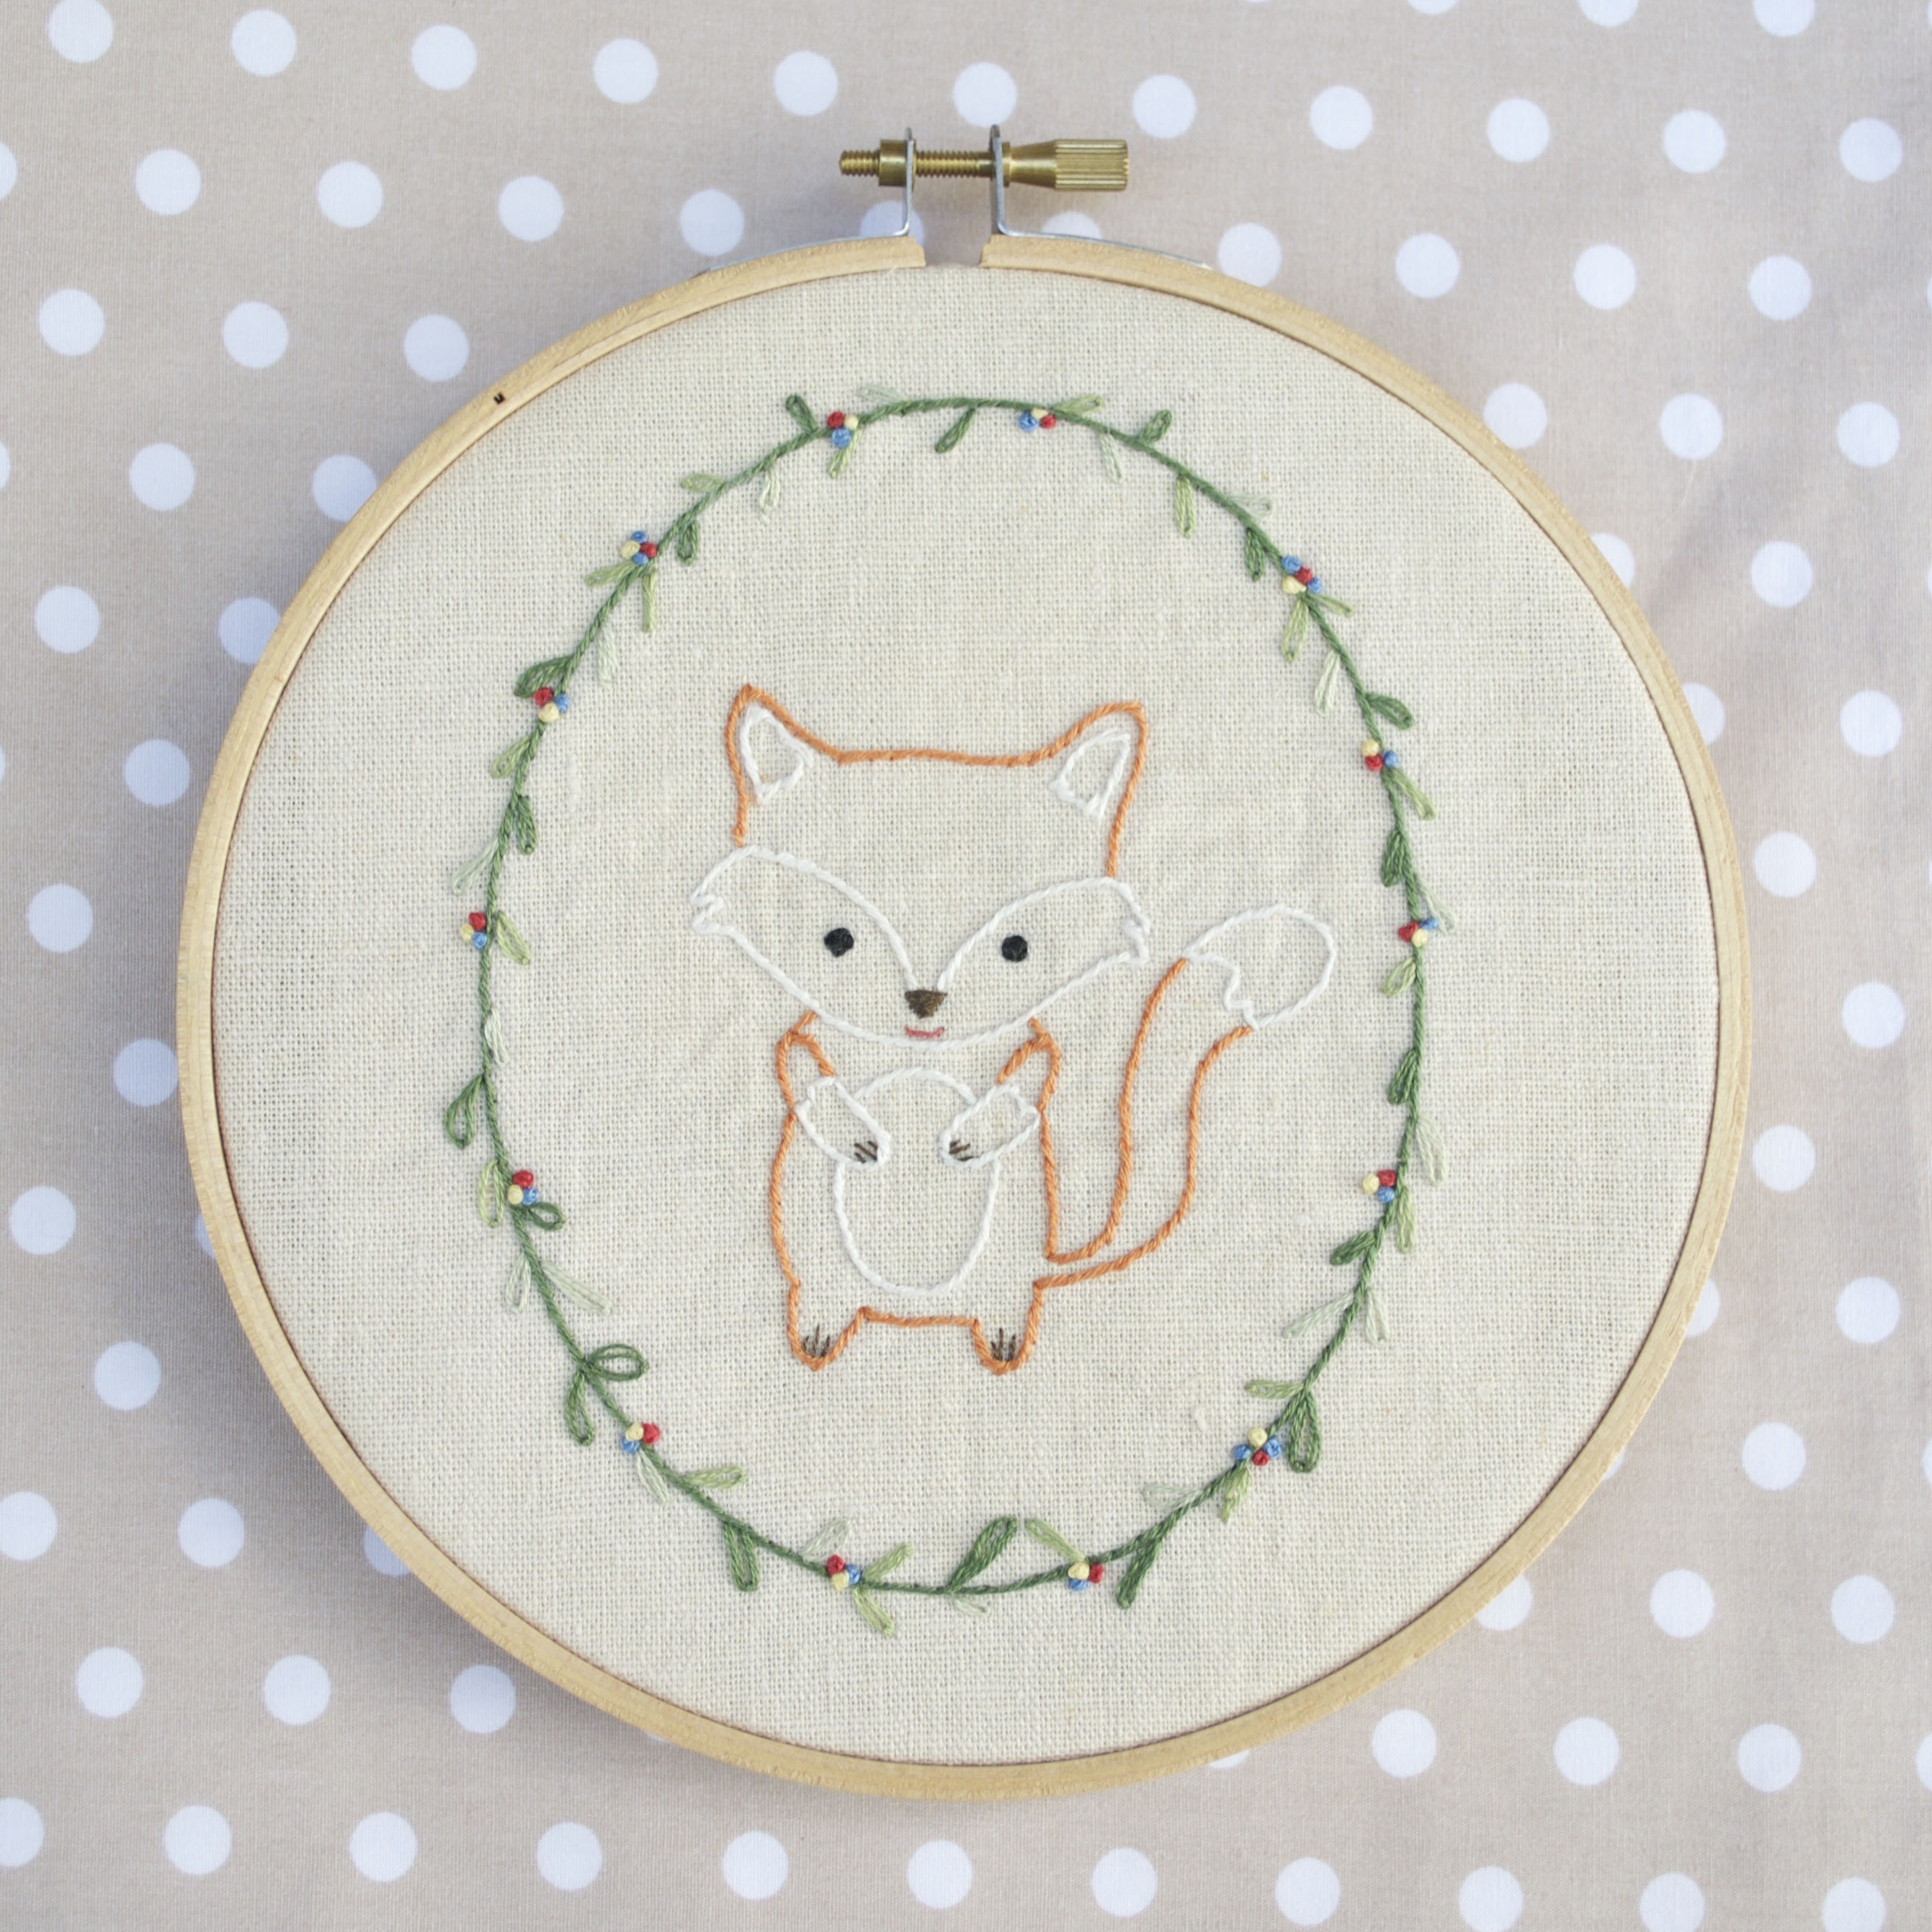 Free Hand Embroidery Patterns For Tea Towels Little Fox Hand Embroidery Pdf Pattern Instructions